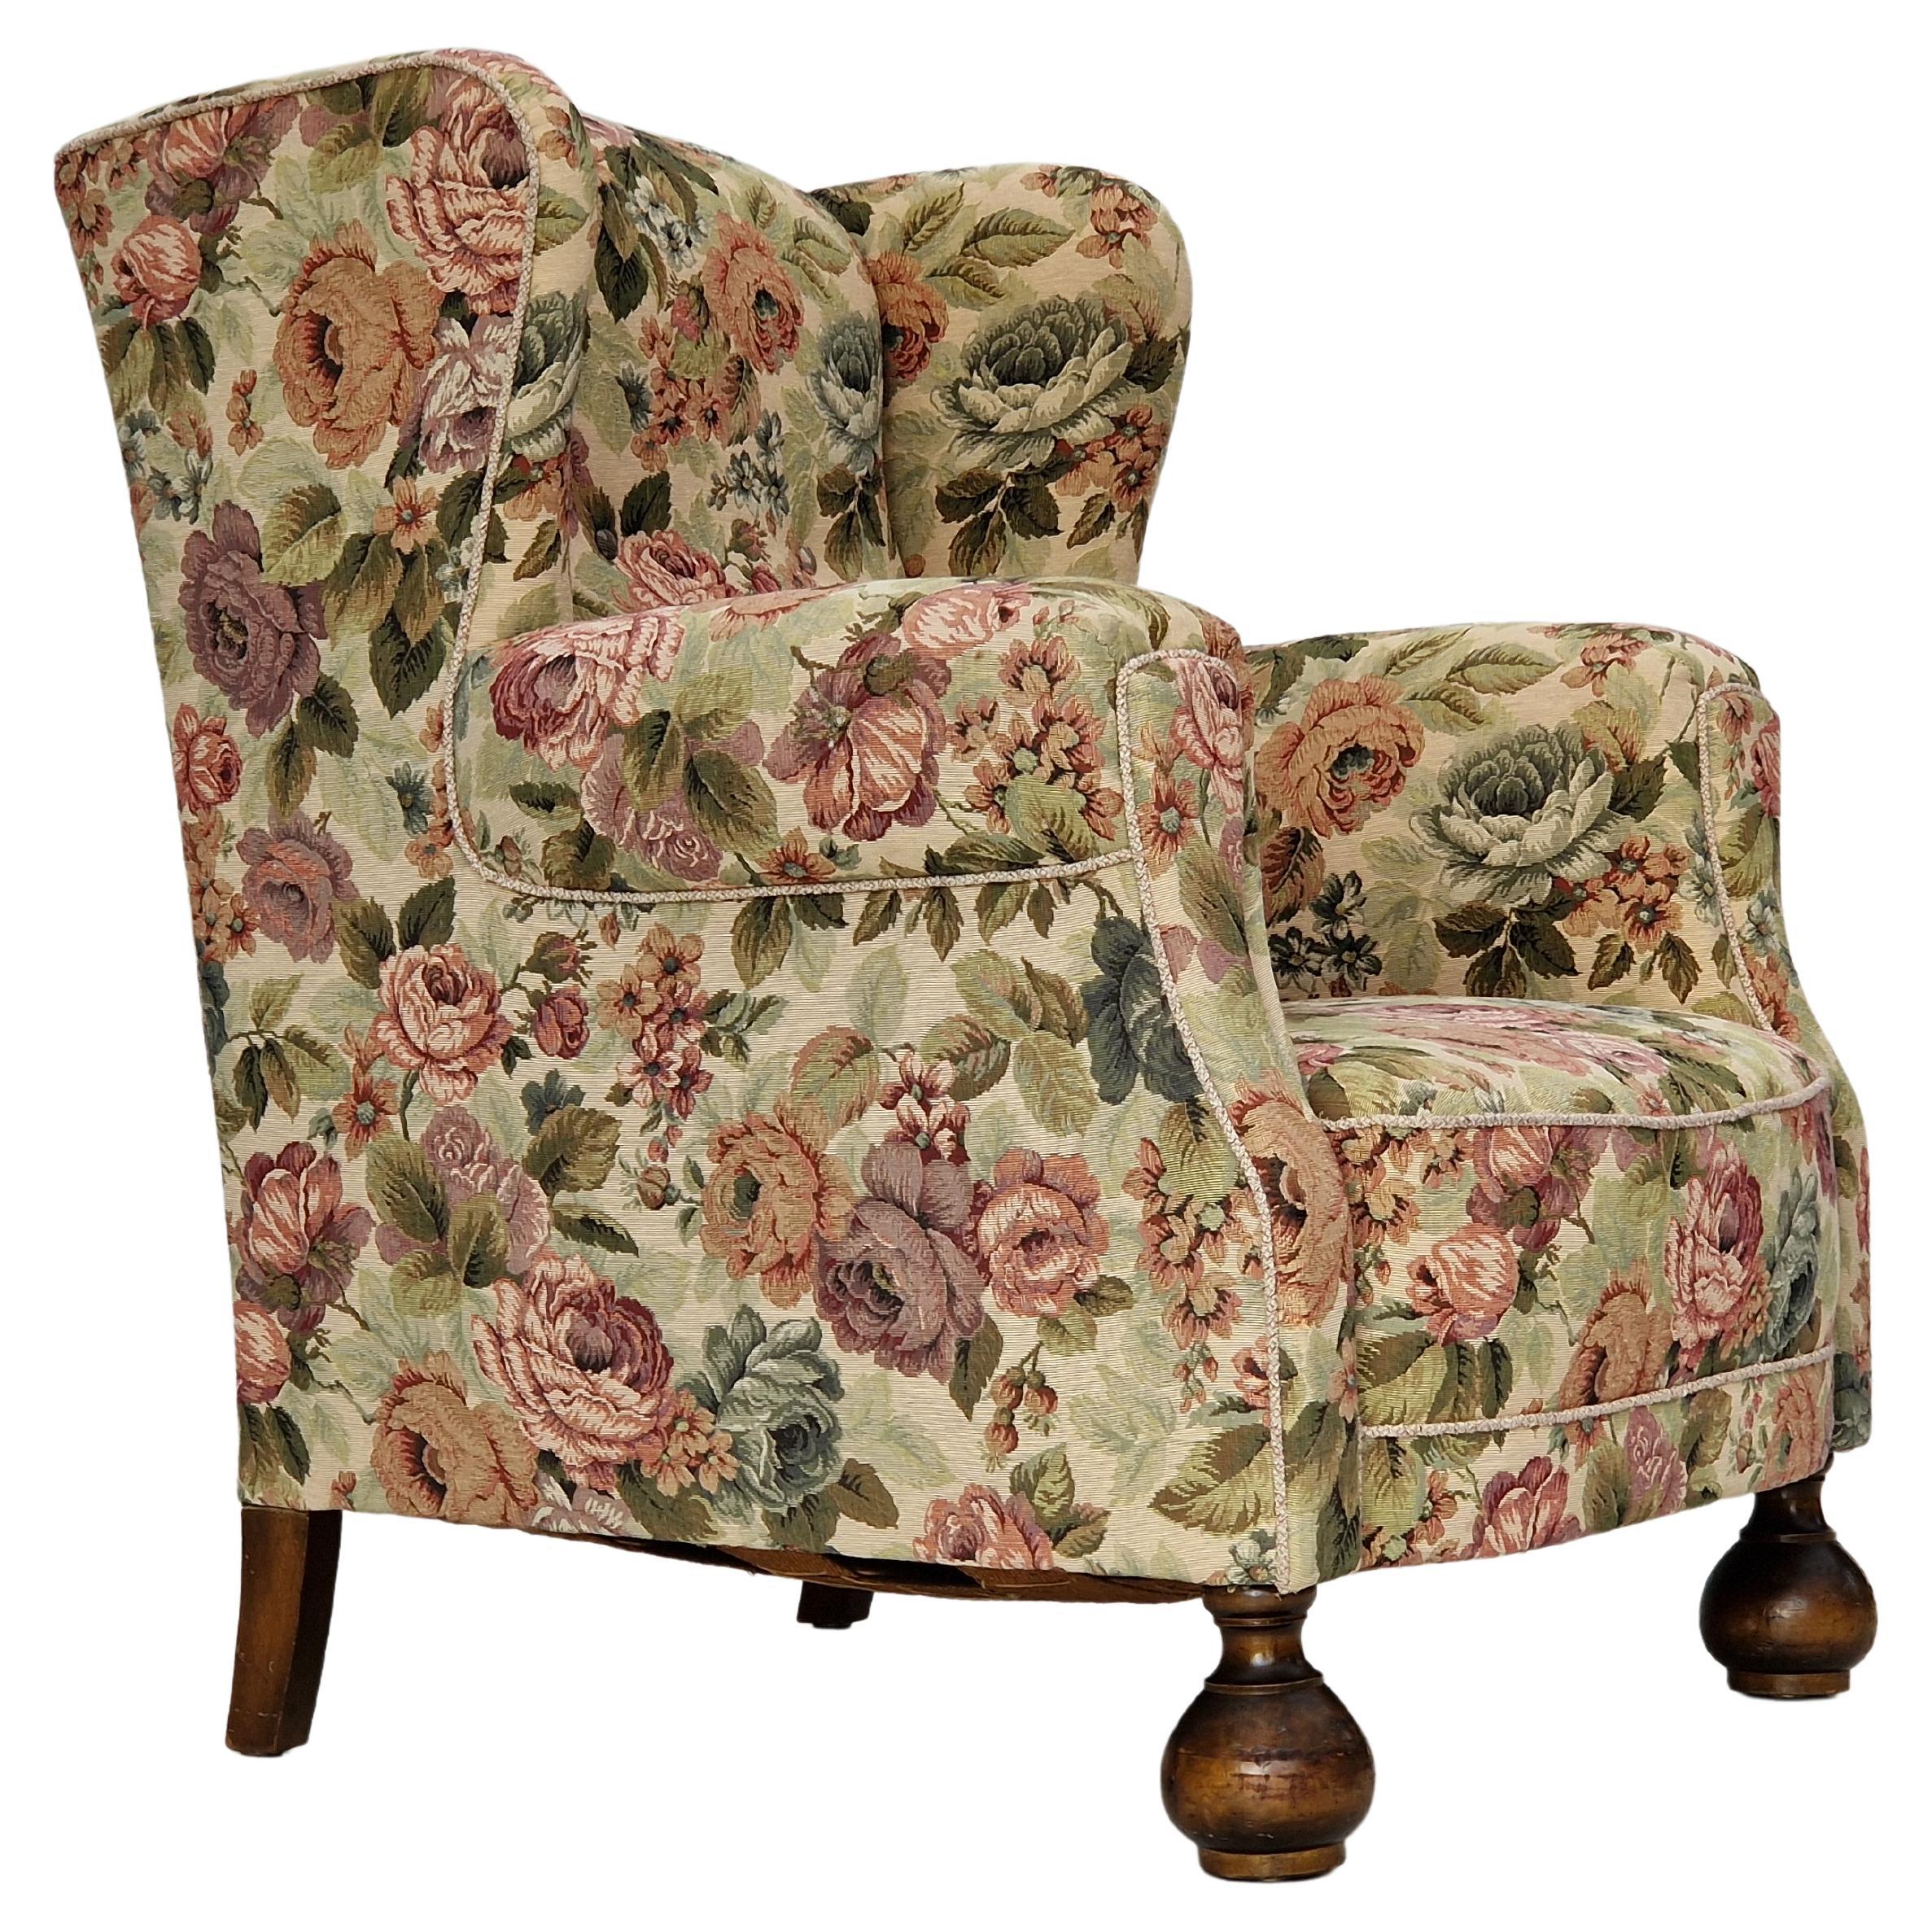 1950s, Danish vintage relax chair in "flowers" fabric, original condition. For Sale